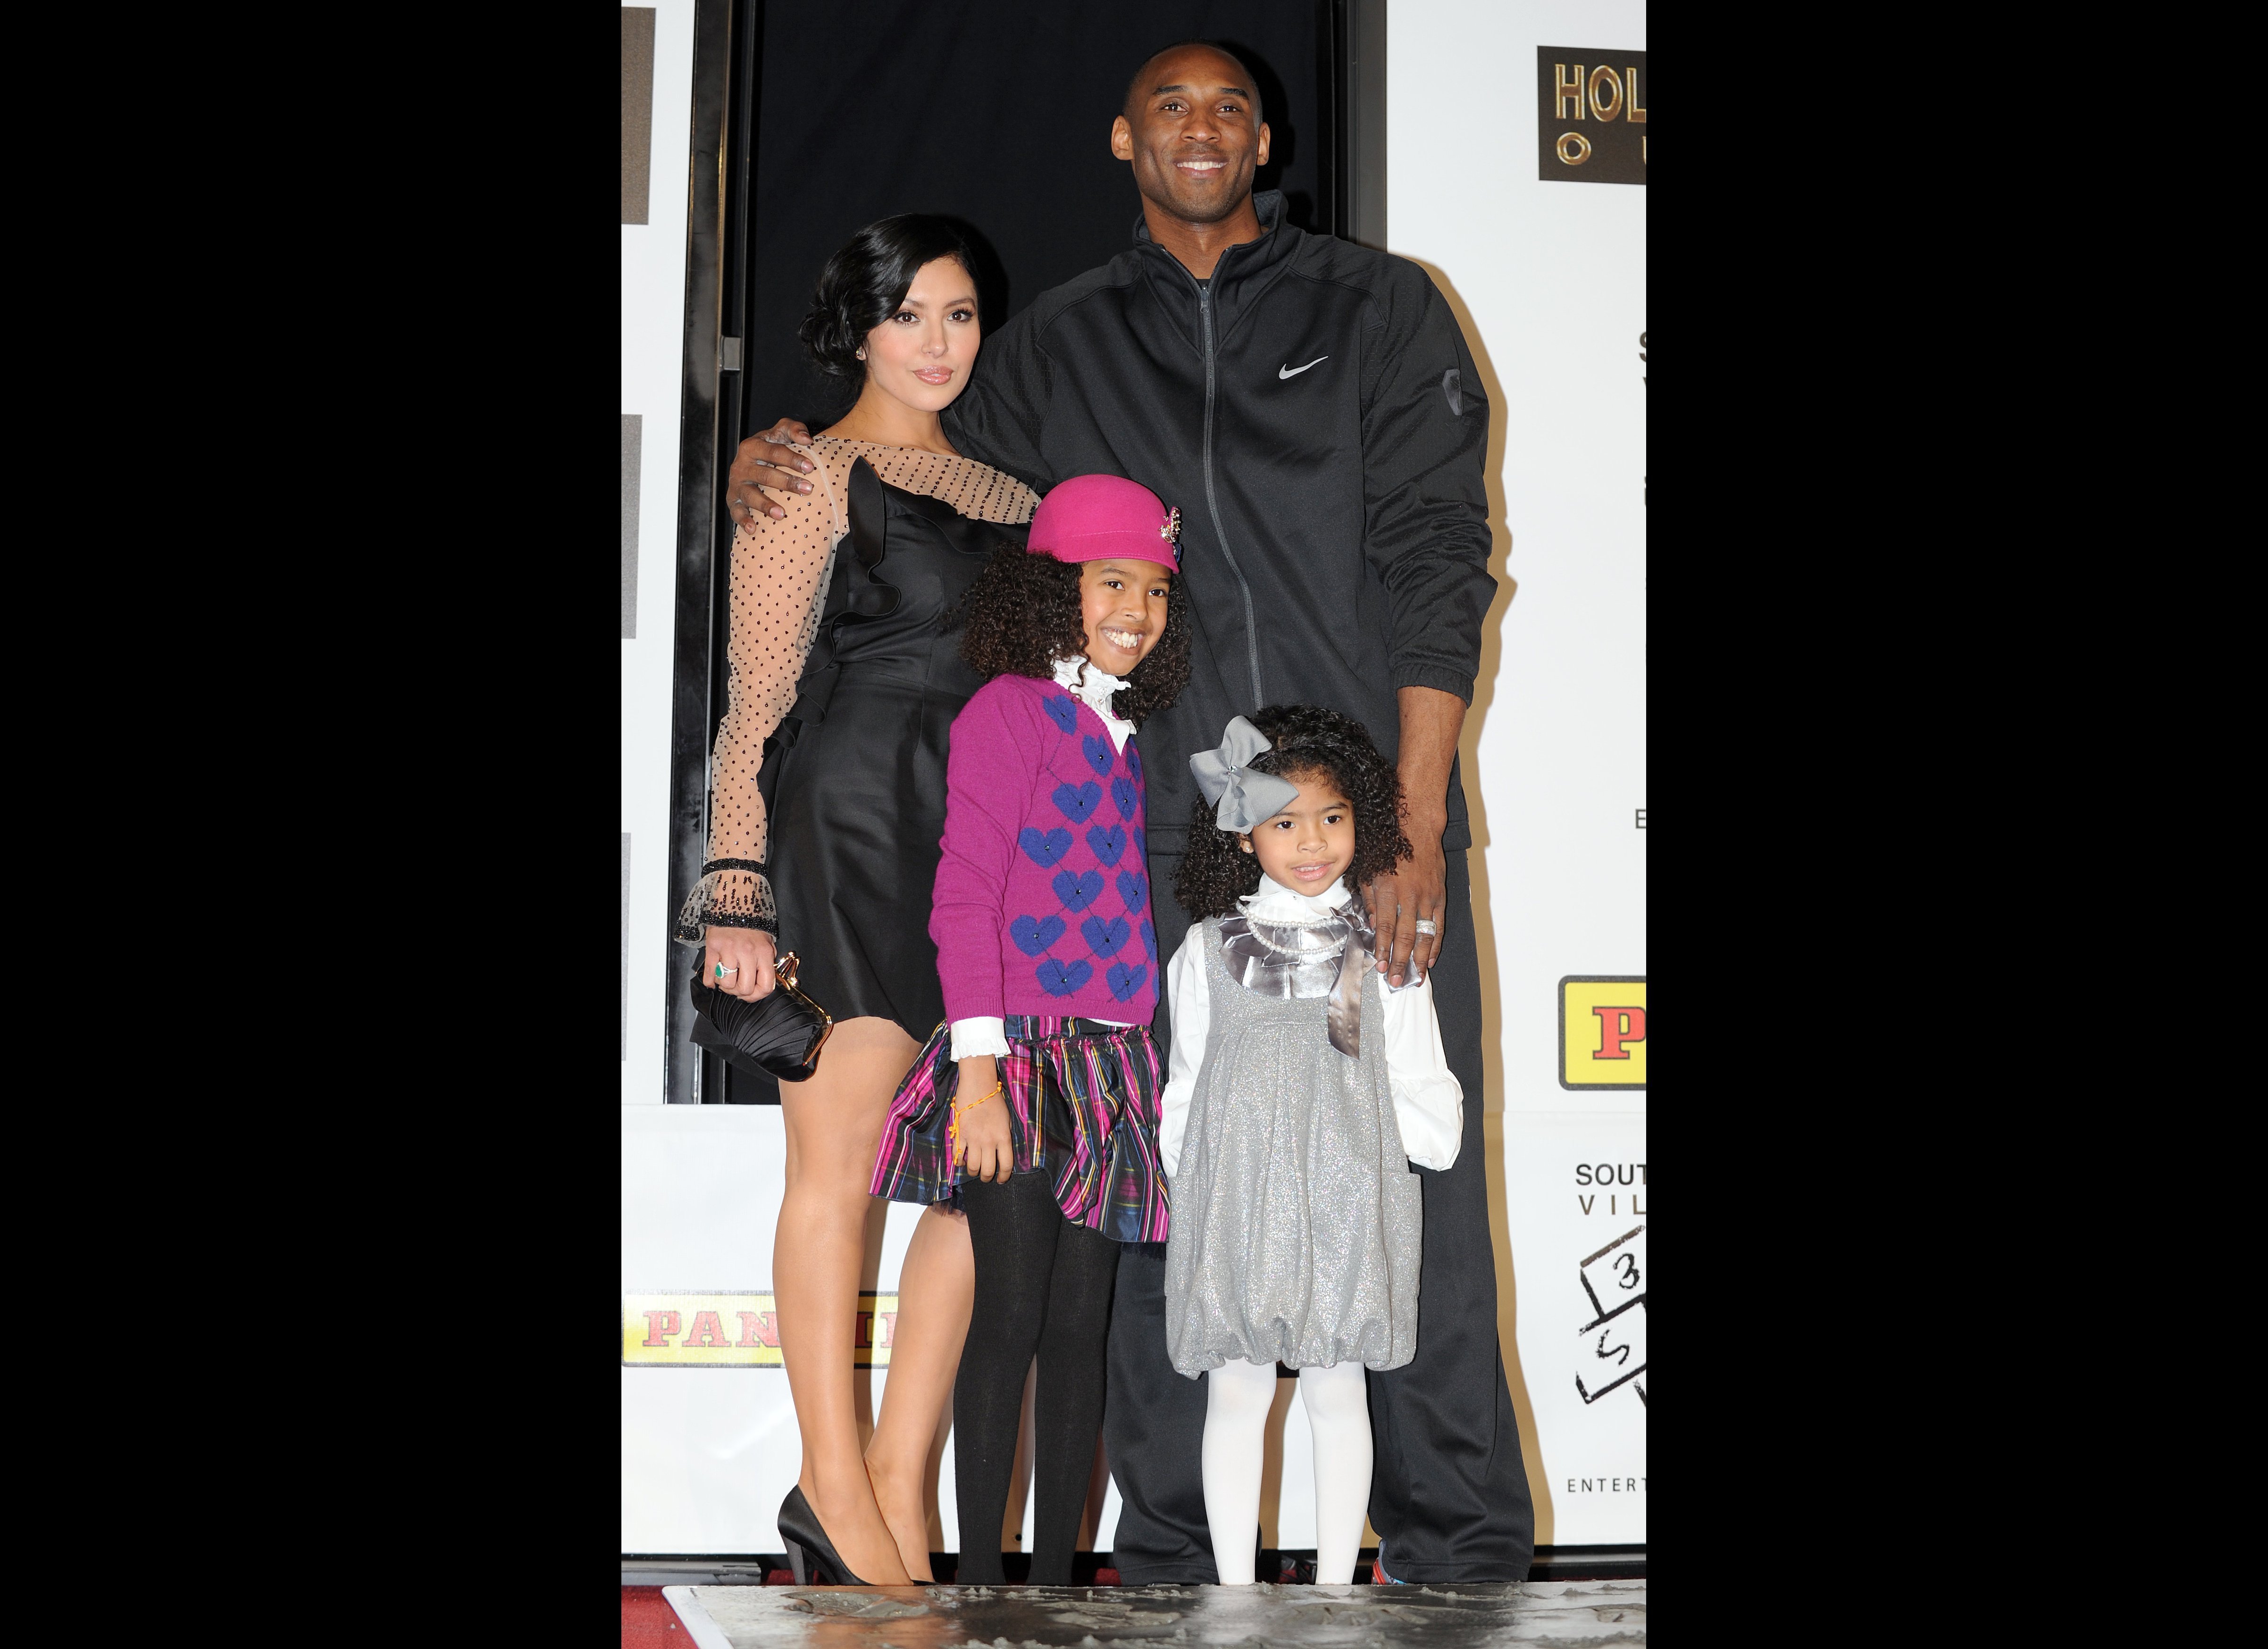 Kobe Bryant Marriage Over: What Will 